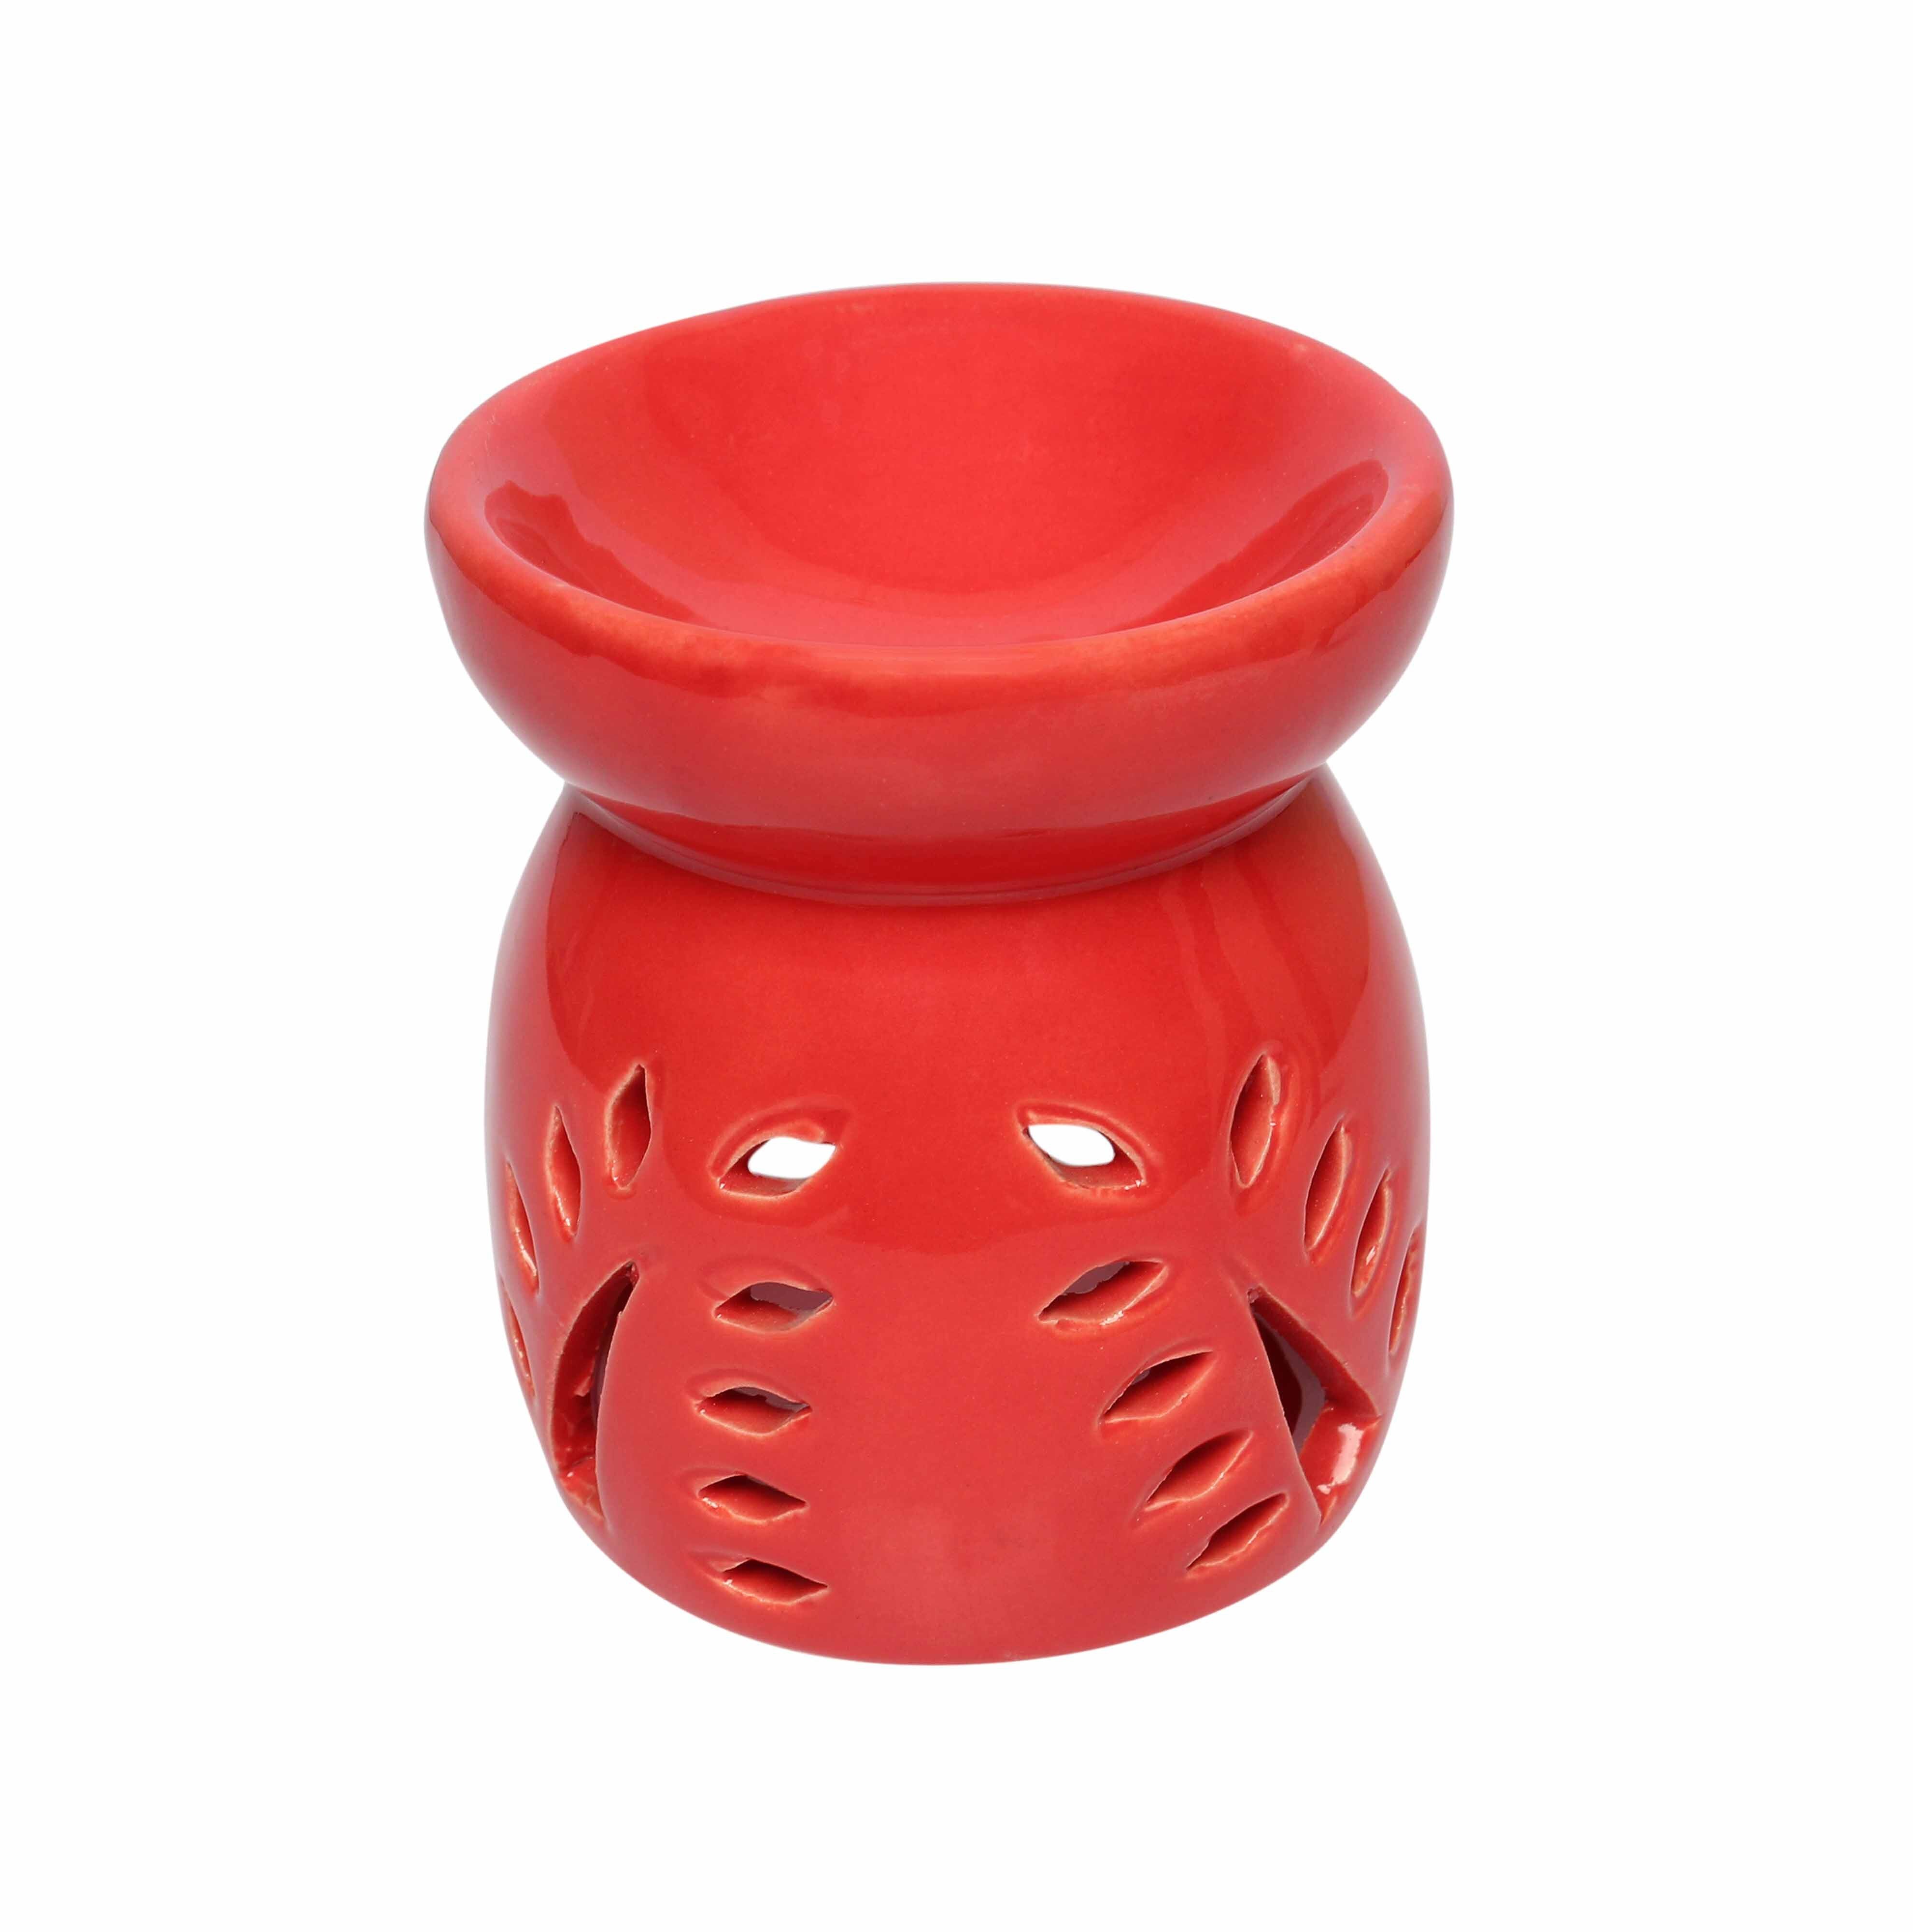 Asian Aura Ceramic Aromatic Oil Diffuser with 2 oil bottles AA-CB-0029Red